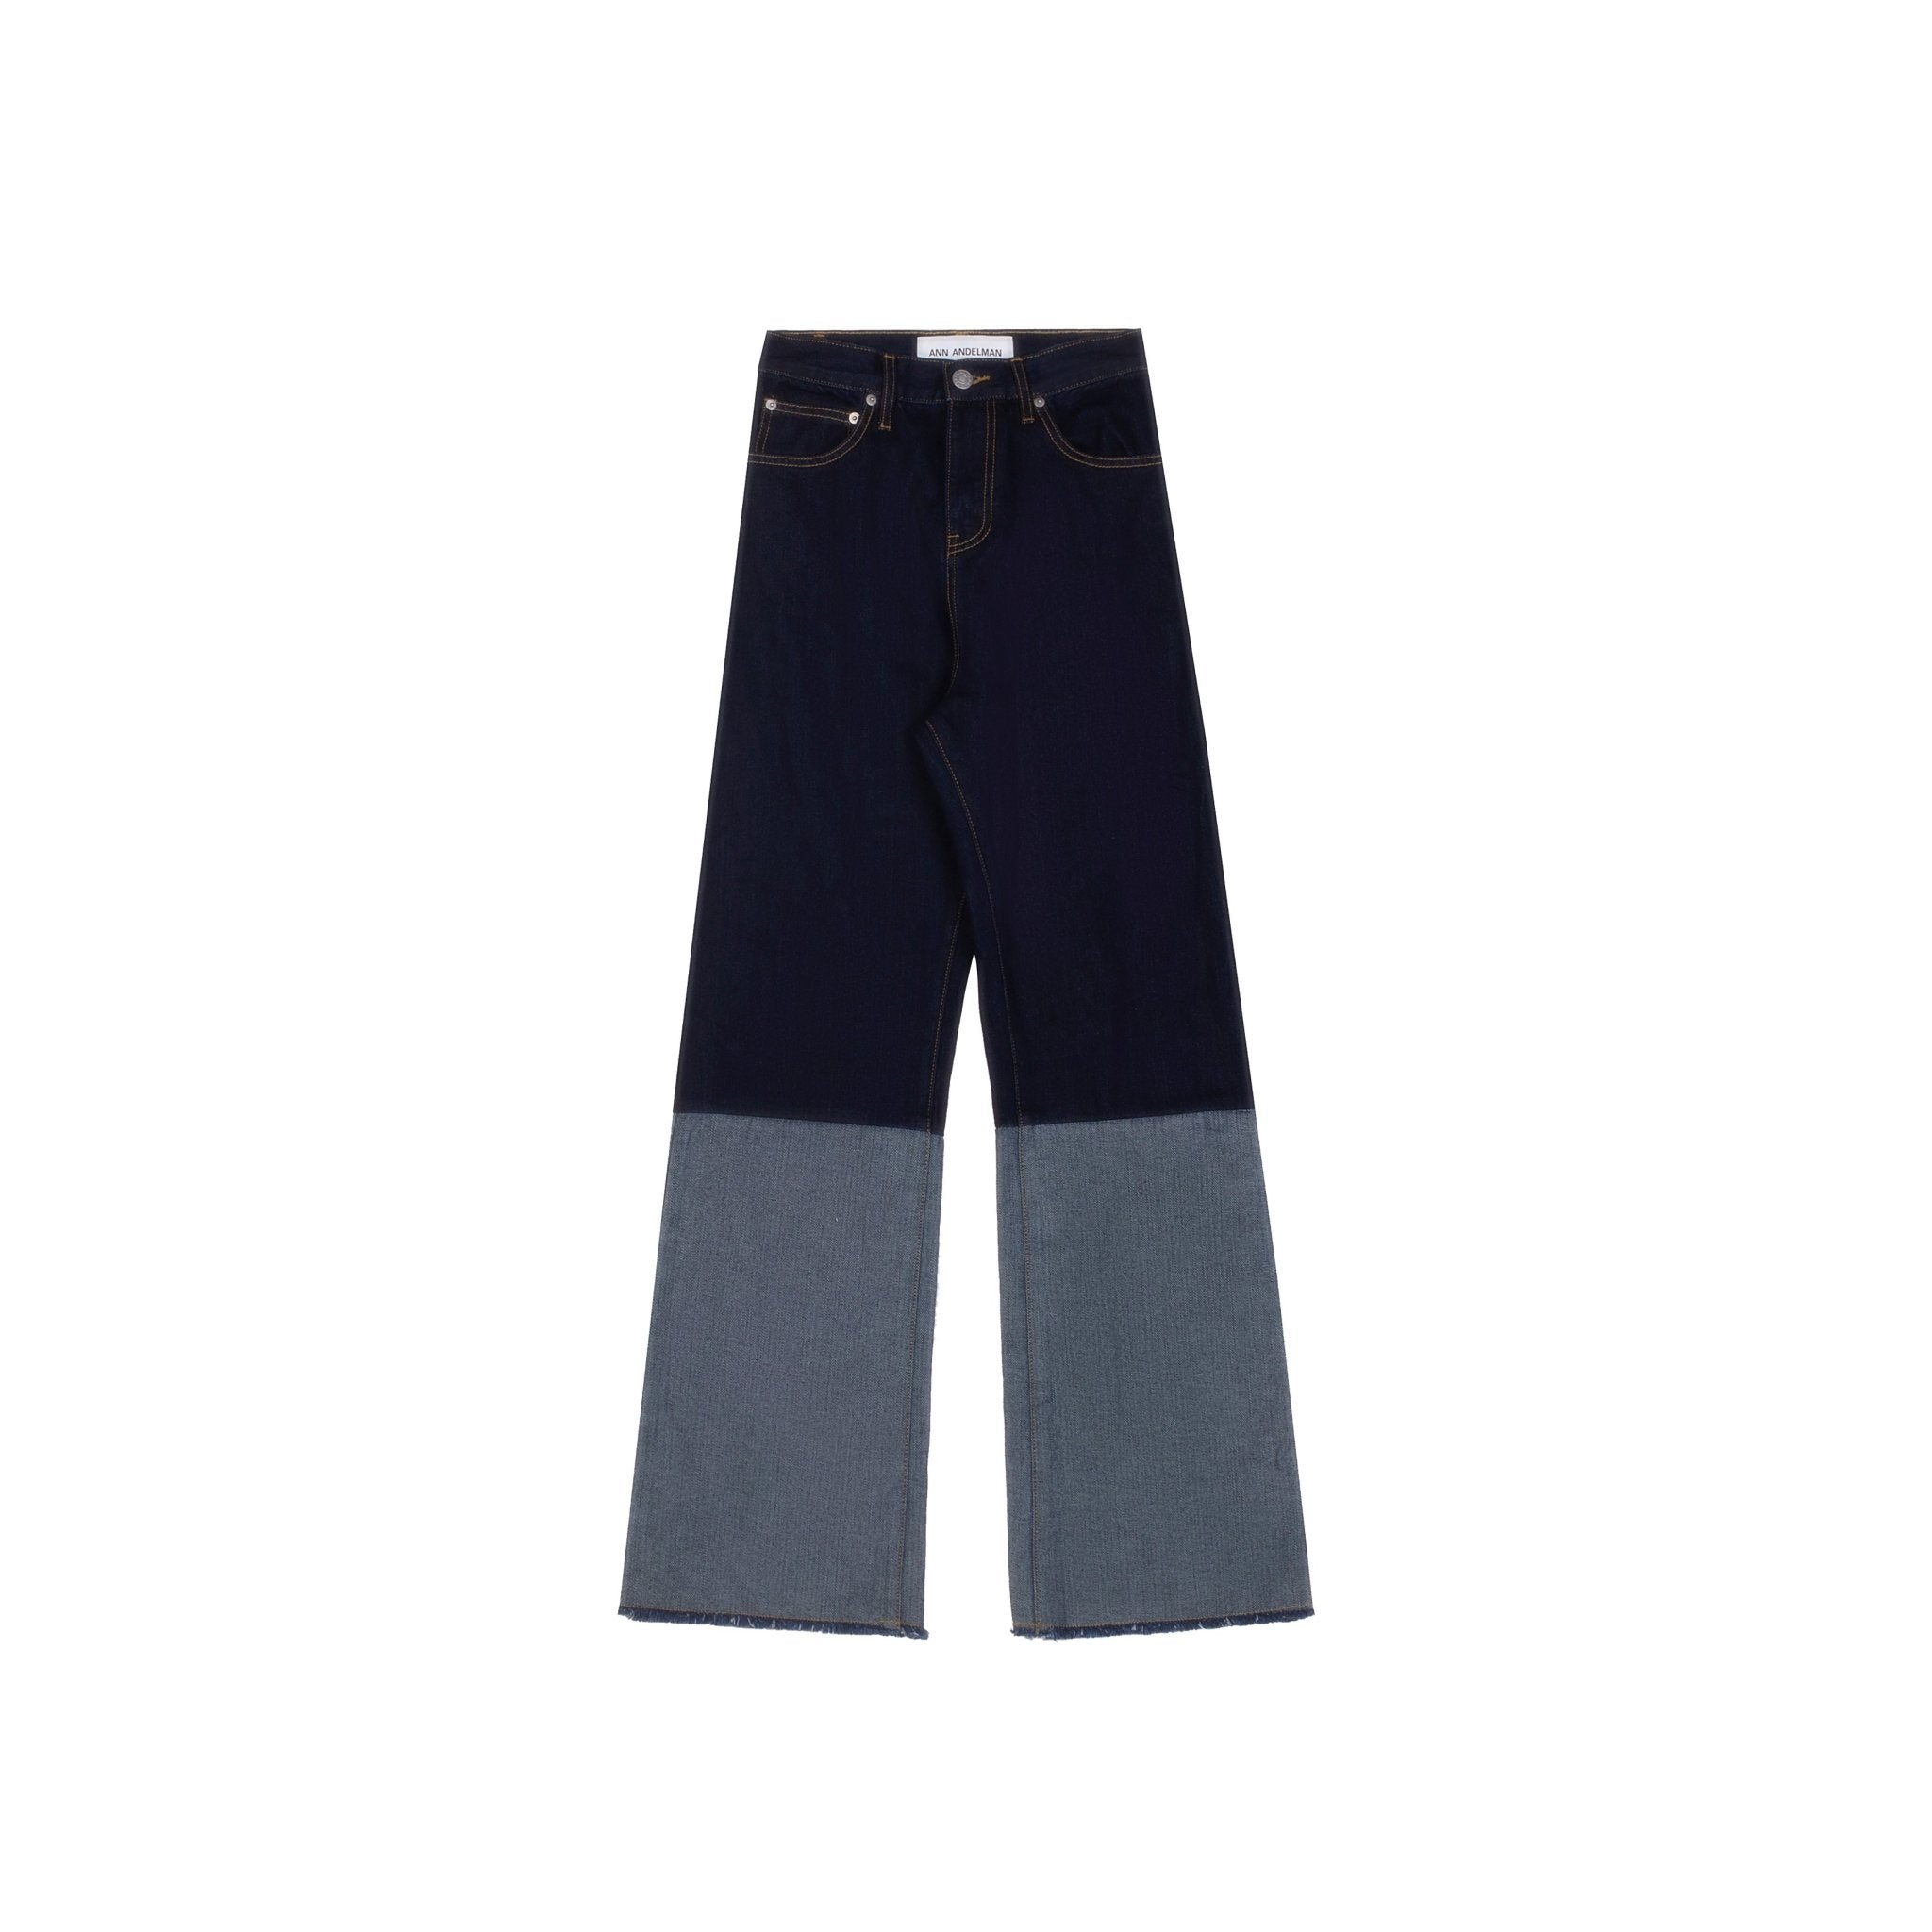 ANN ANDELMAN Navy Blue Panelled Jeans | MADA IN CHINA